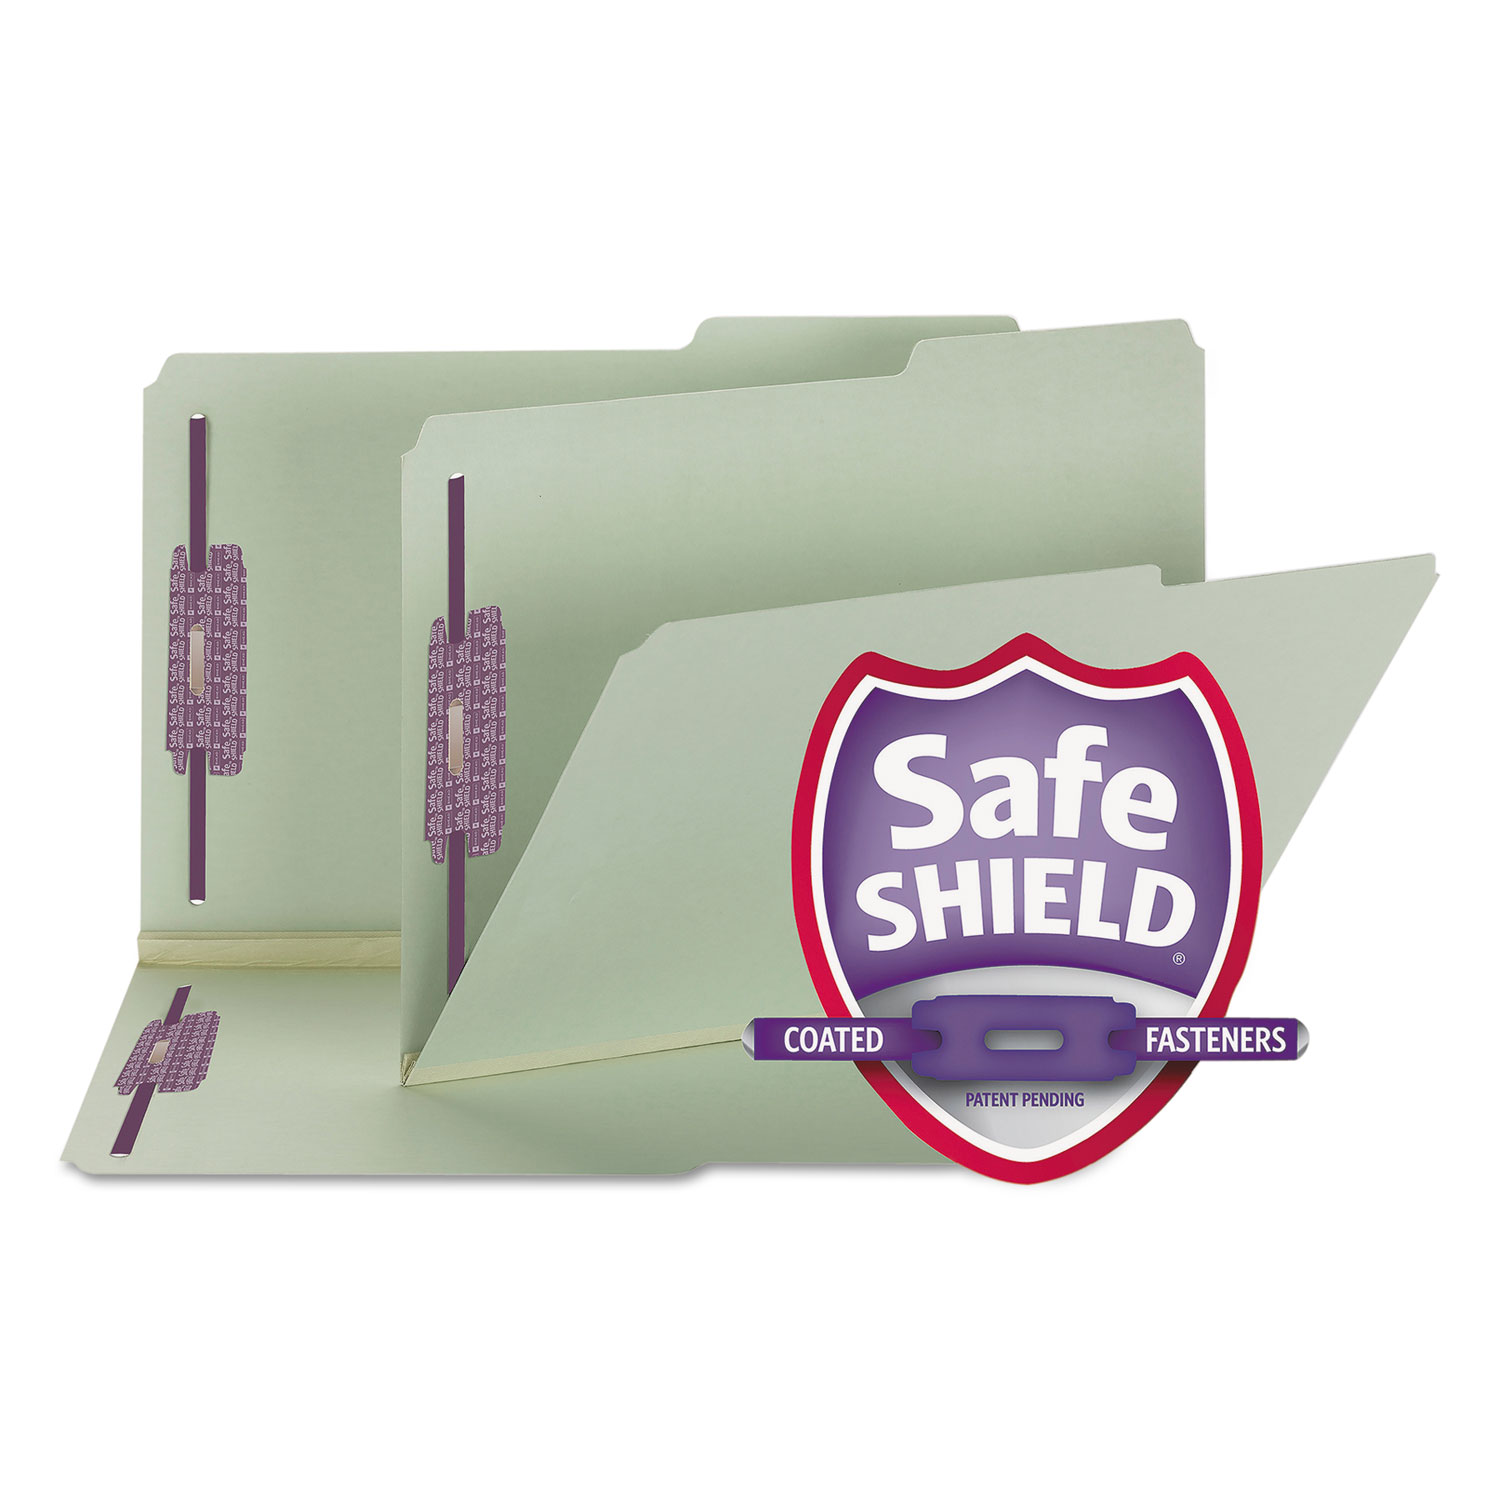  Smead 19920 Recycled Pressboard Folders w/Two SafeSHIELD Fasteners, 2/5-Cut Tabs, Right of Center, 2 Exp, Legal Size, Gray-Green, 25/Box (SMD19920) 